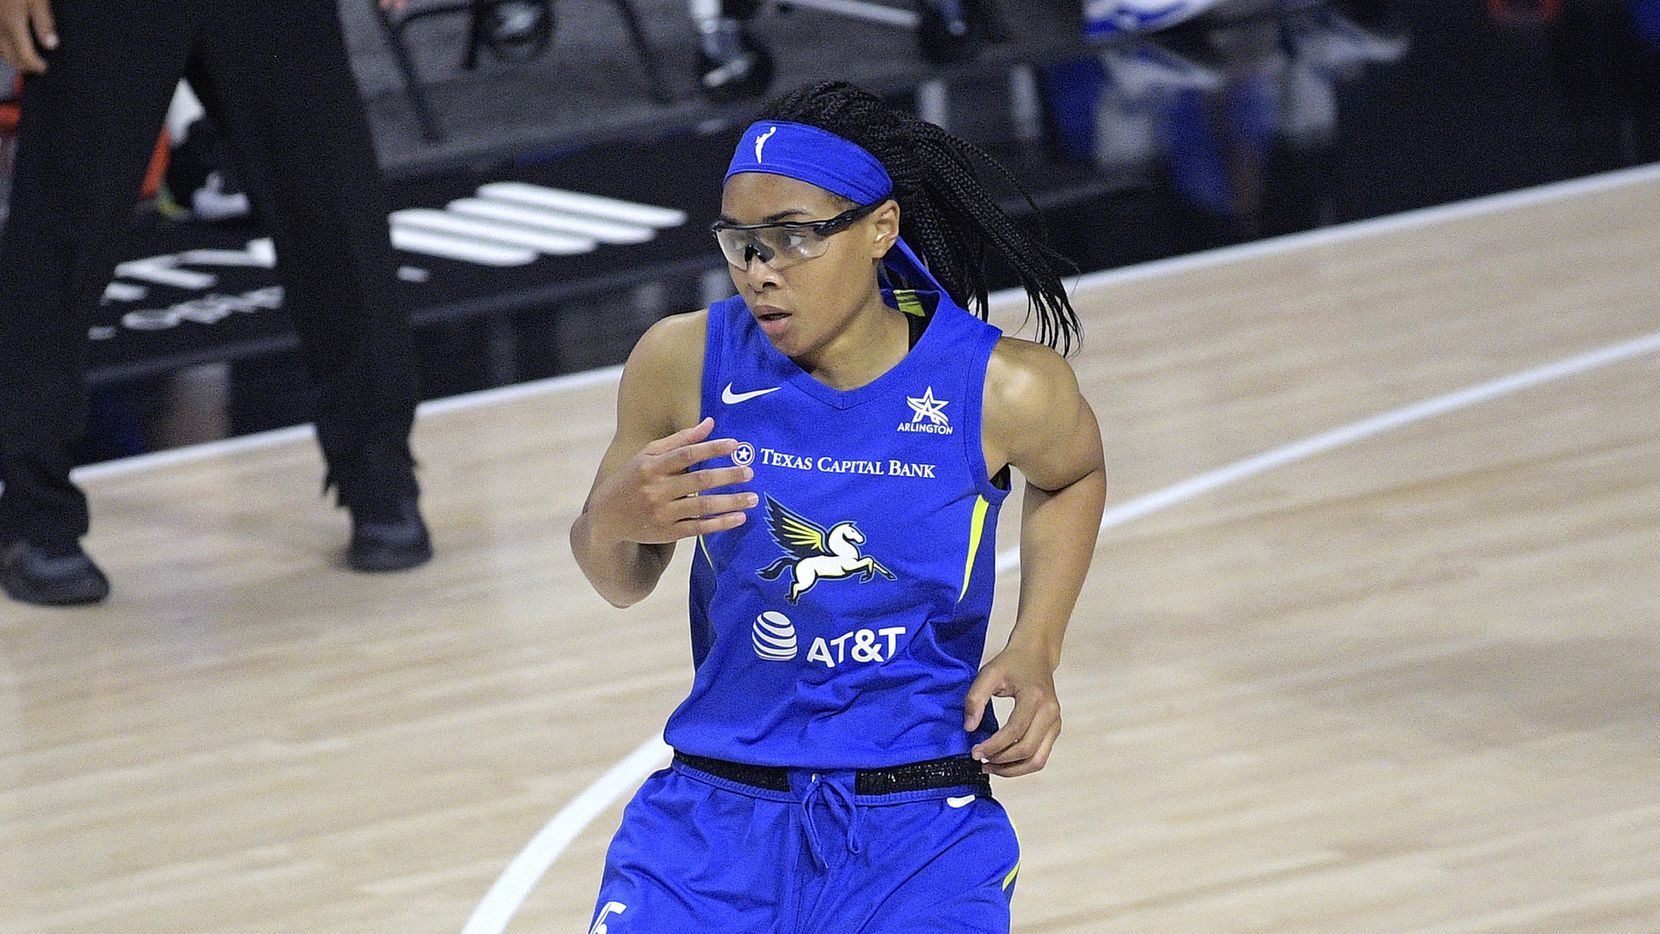 Dallas Wings guard Allisha Gray reacts after a play during the second half of a WNBA basketball game against the Atlanta Dream, Sunday, July 26, 2020, in Bradenton, Fla.